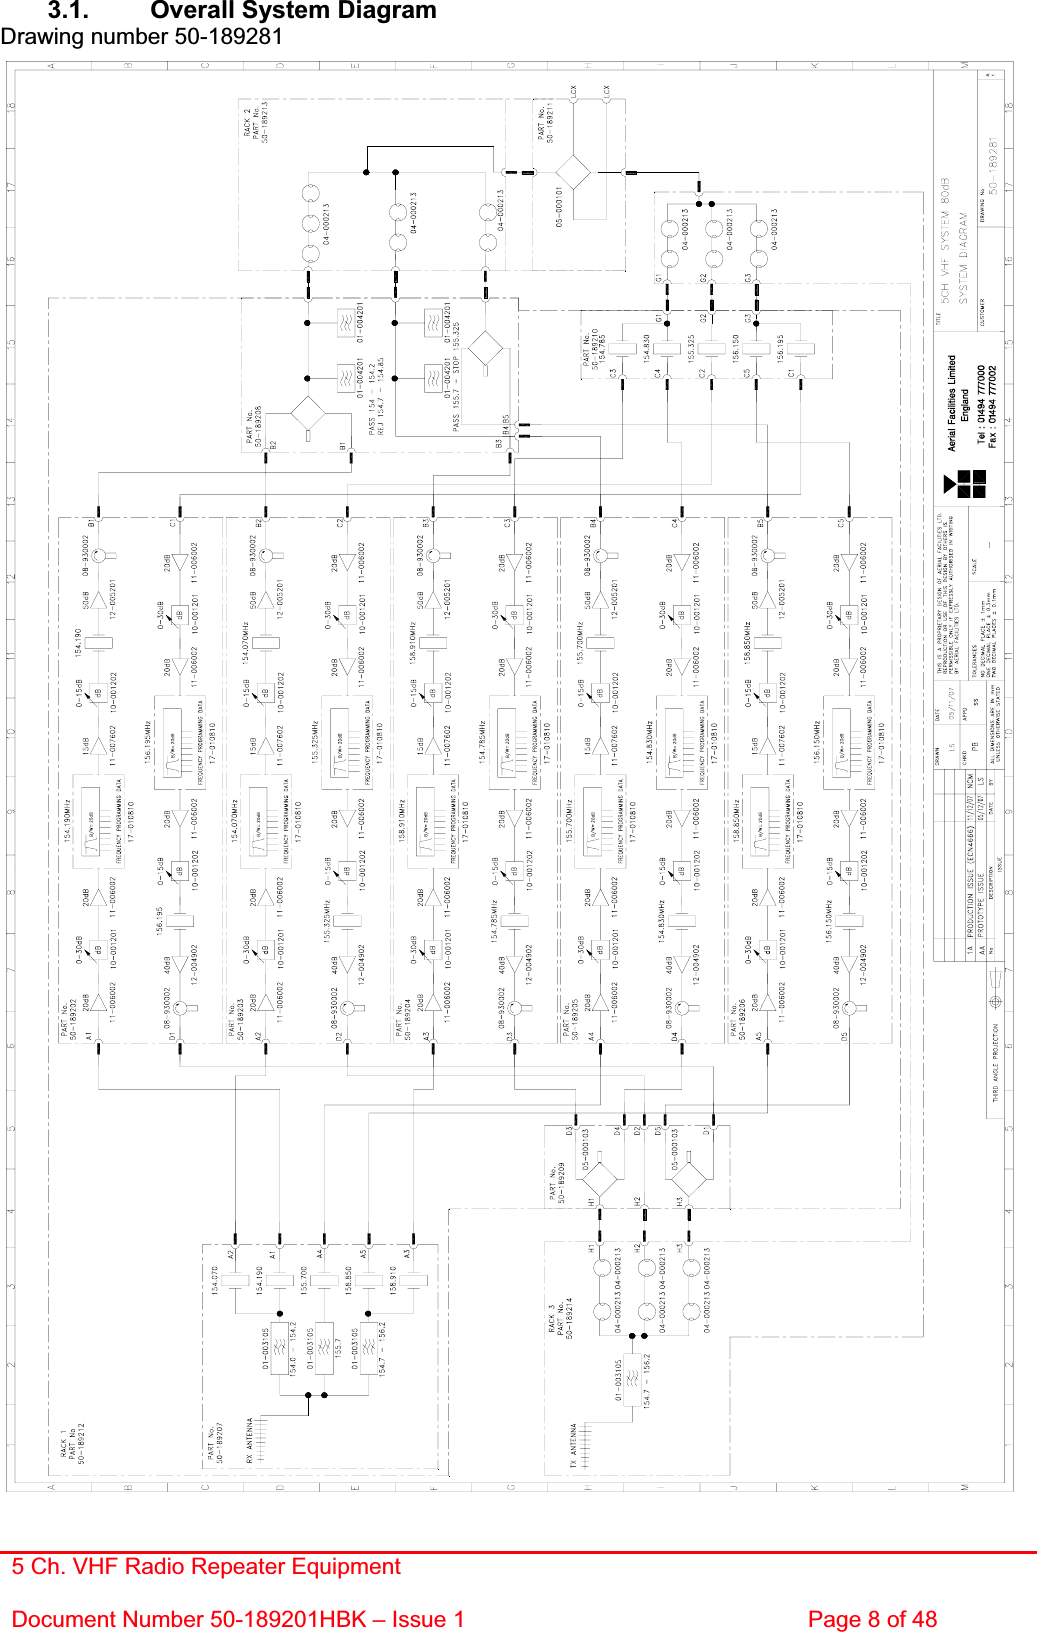 5 Ch. VHF Radio Repeater EquipmentDocument Number 50-189201HBK – Issue 1  Page 8 of 48 3.1.  Overall System Diagram  Drawing number 50-189281 